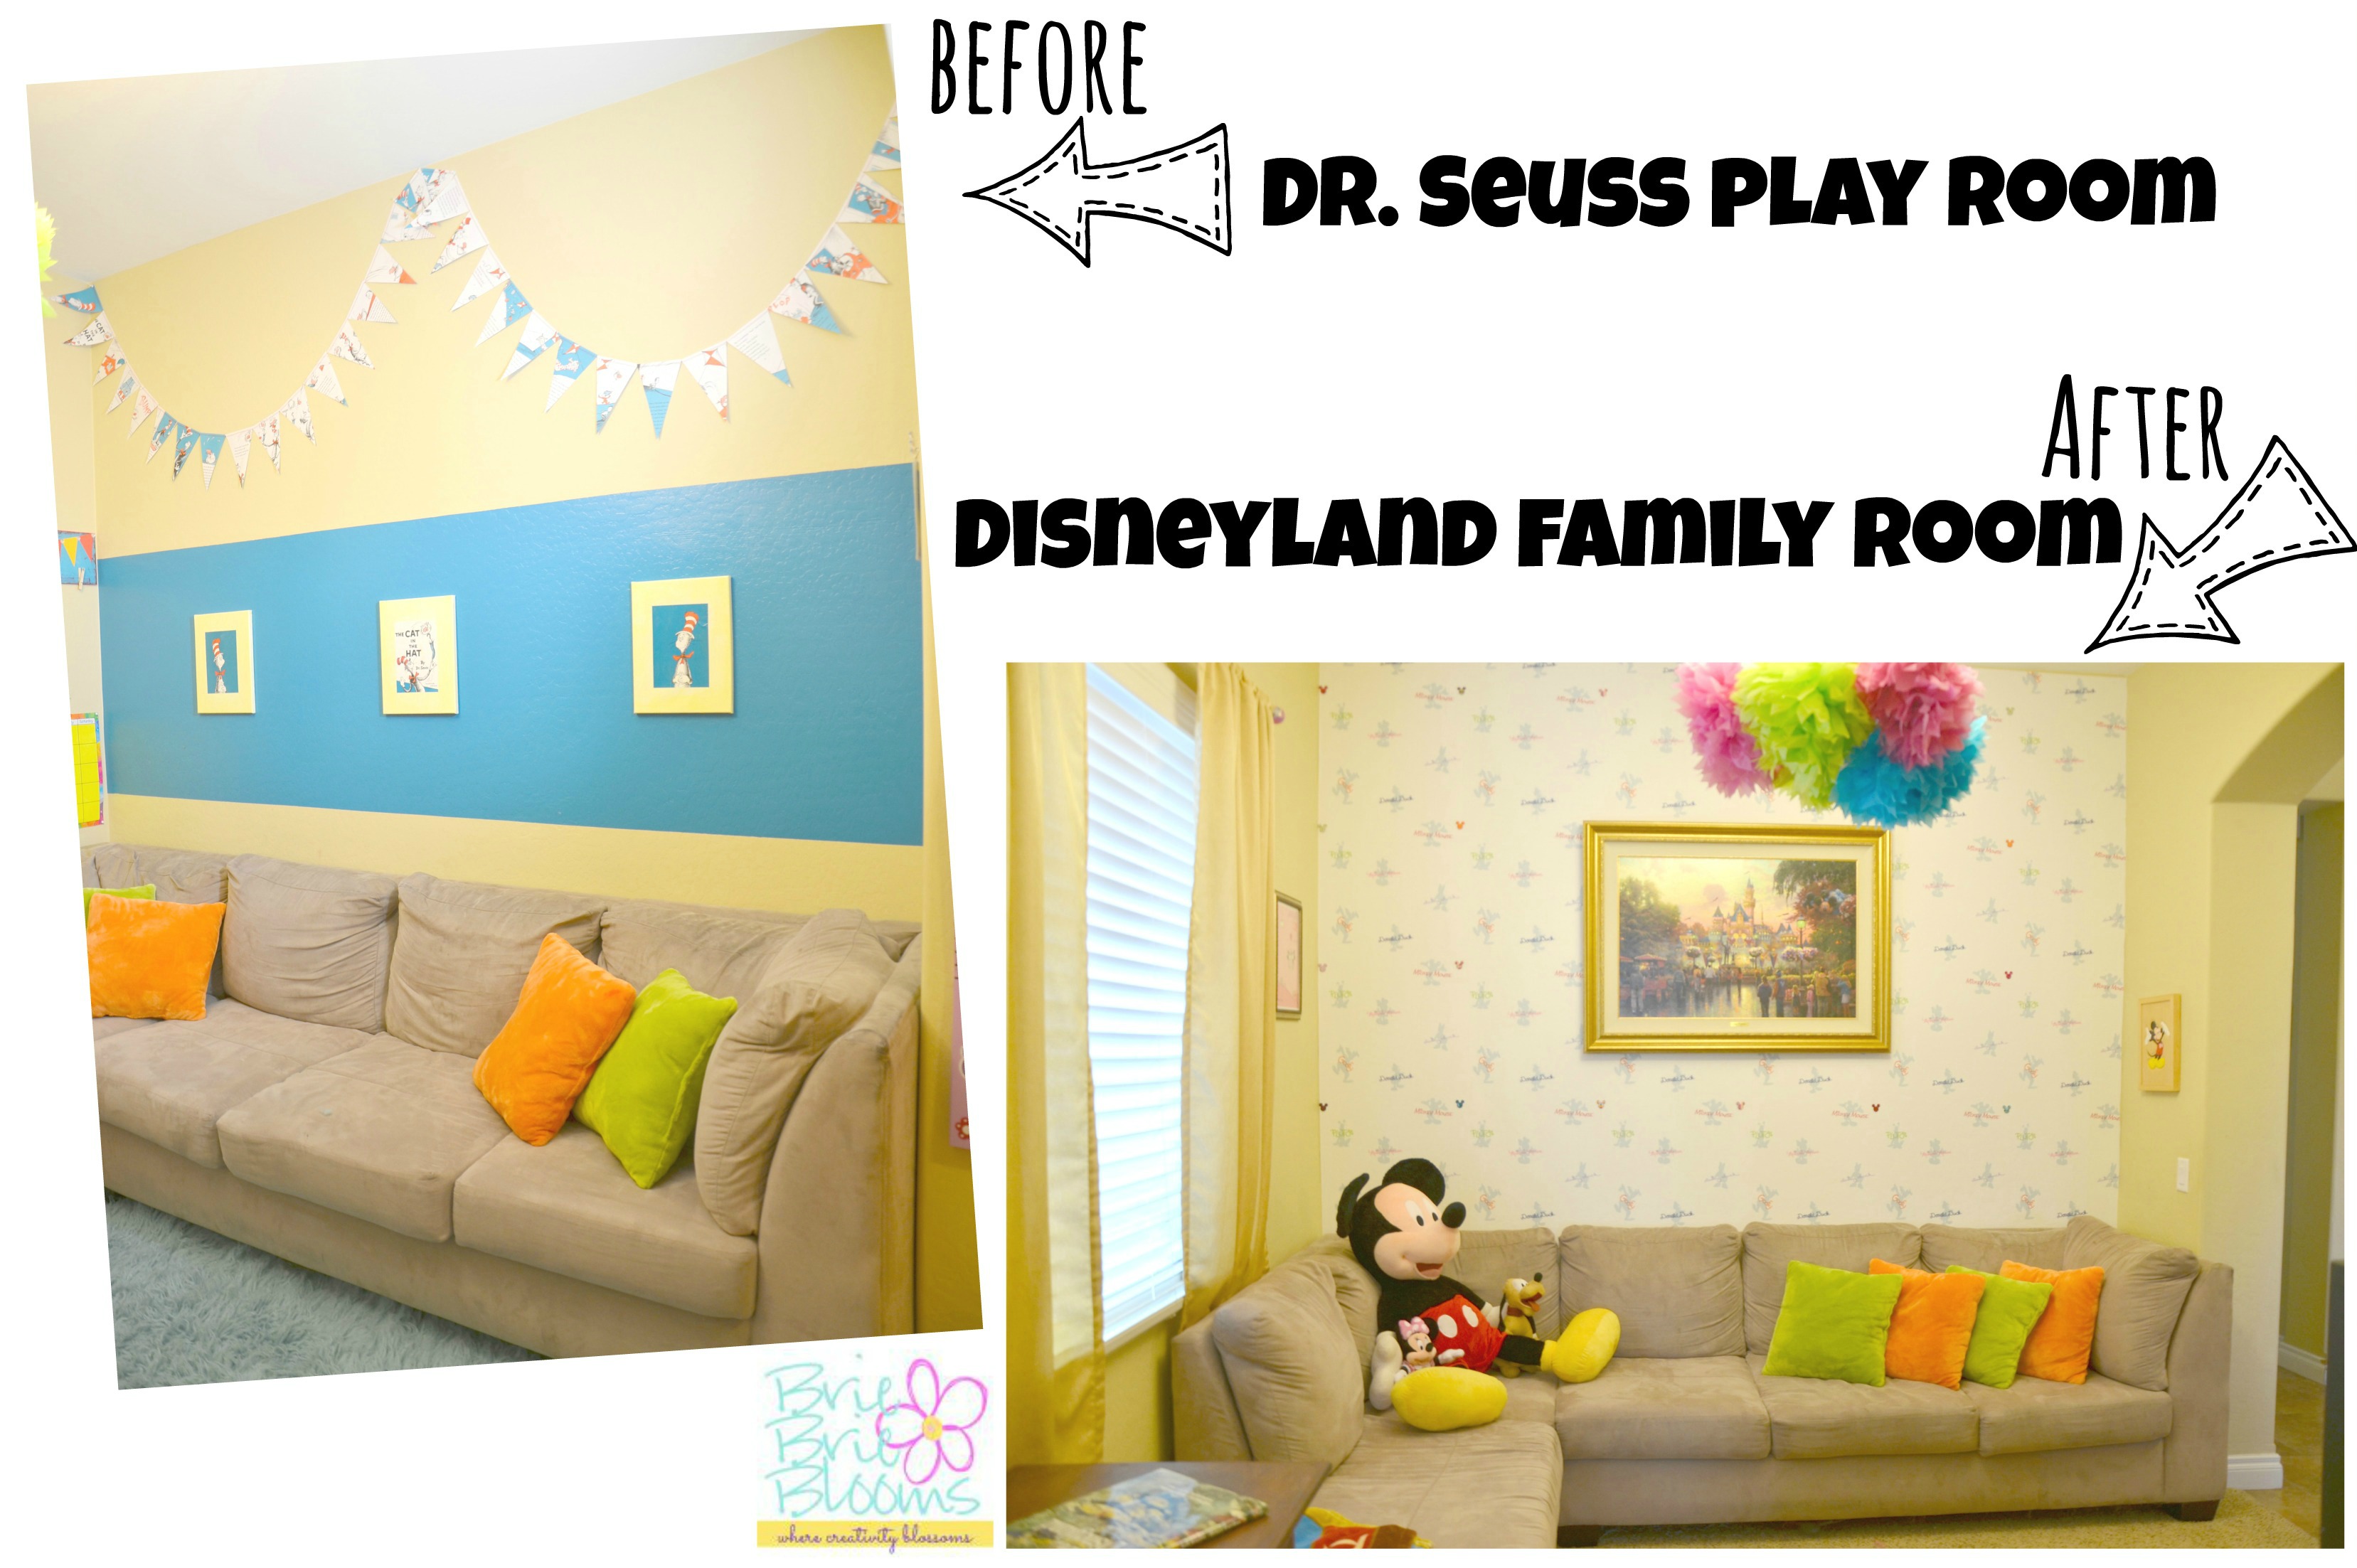 Dr. Seuss play room makeover to Disneyland family game room